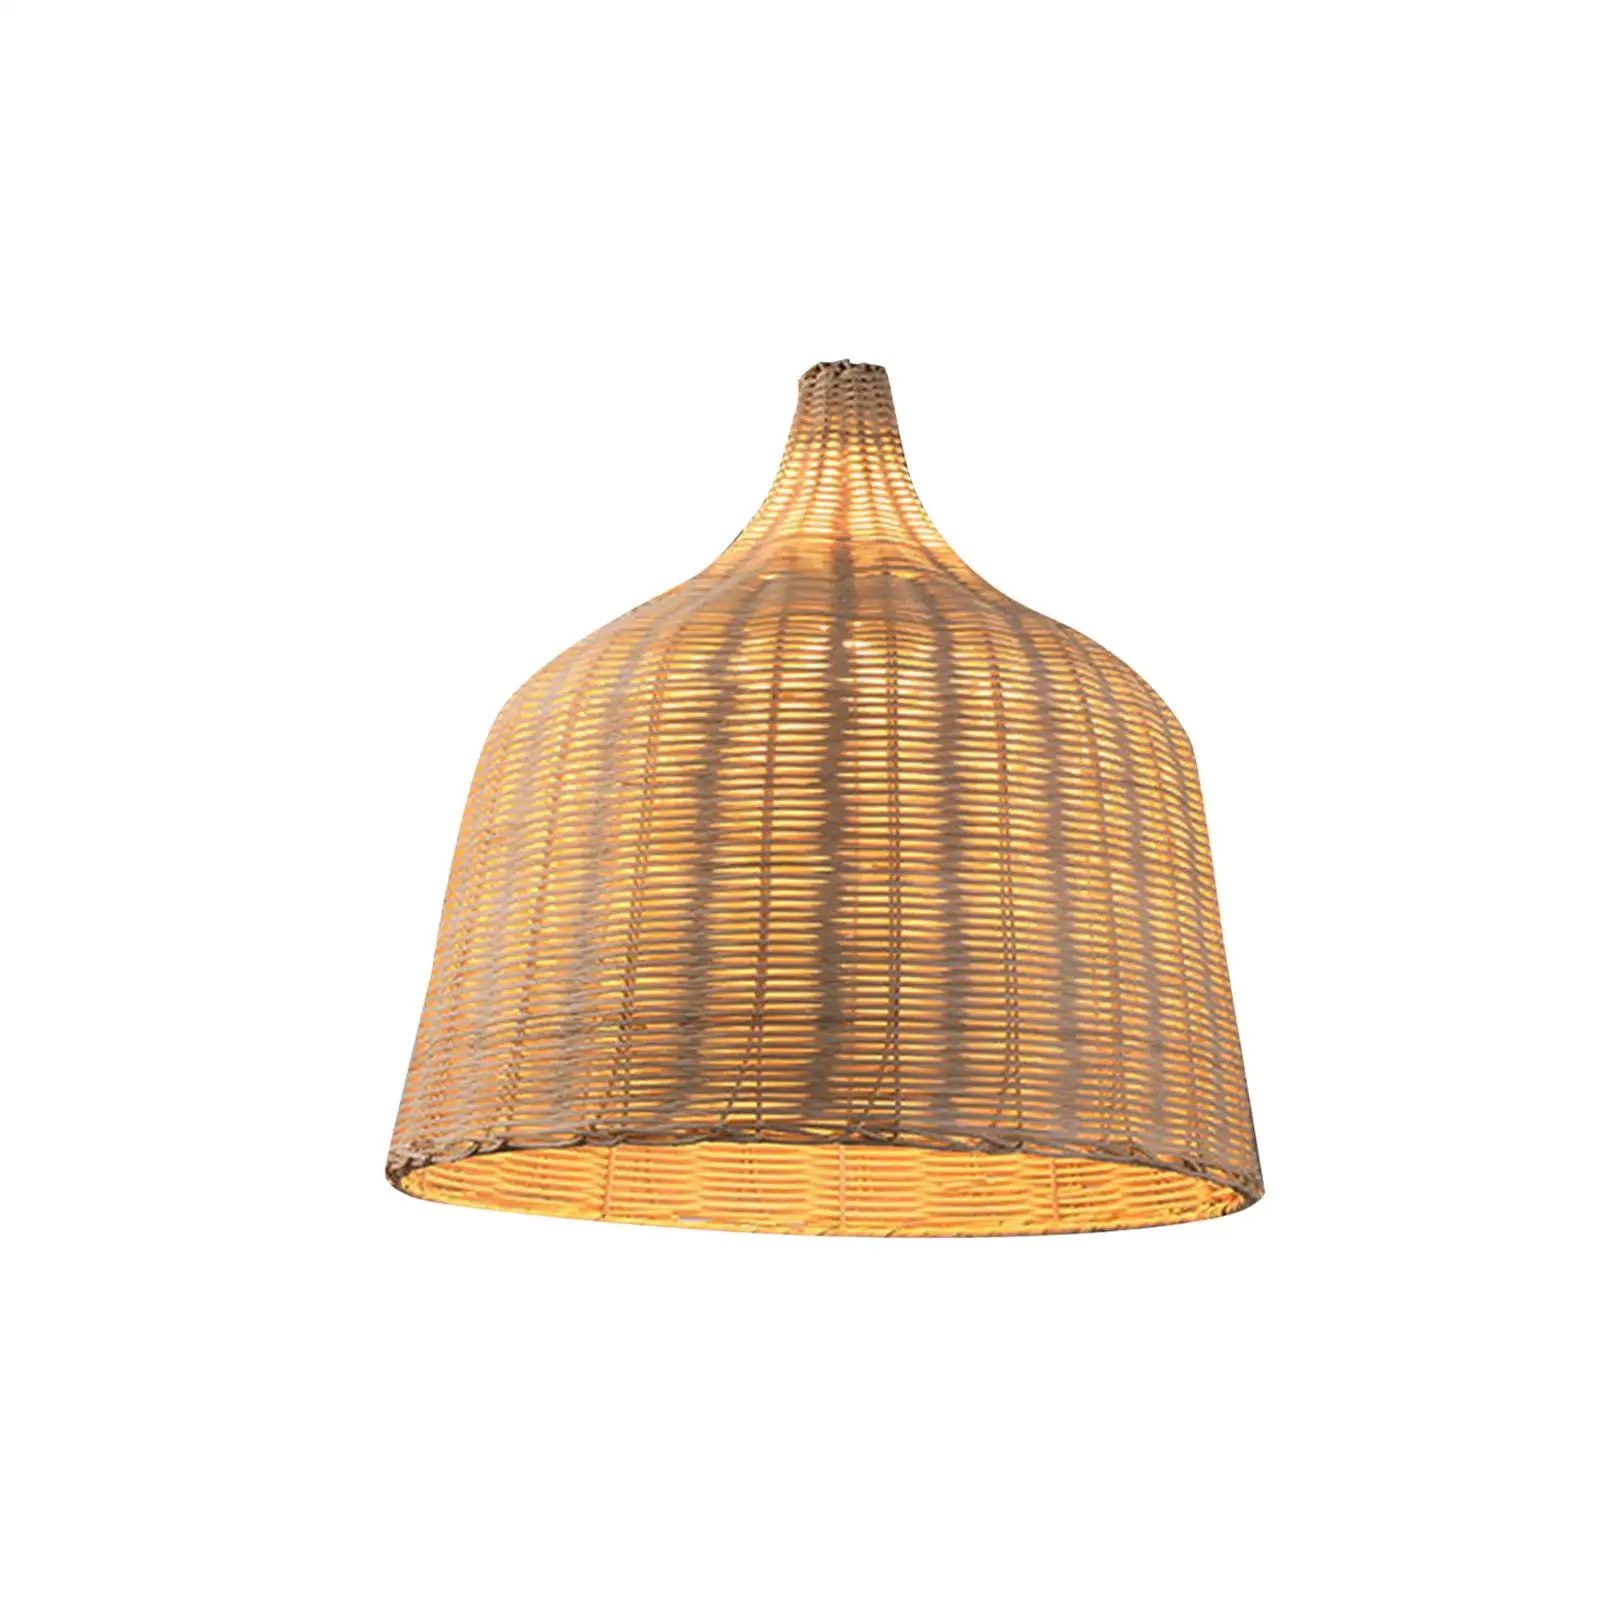 Woven Pendant Lamp Shade Farmhouse Hanging Light Shade for Dining Room Decor